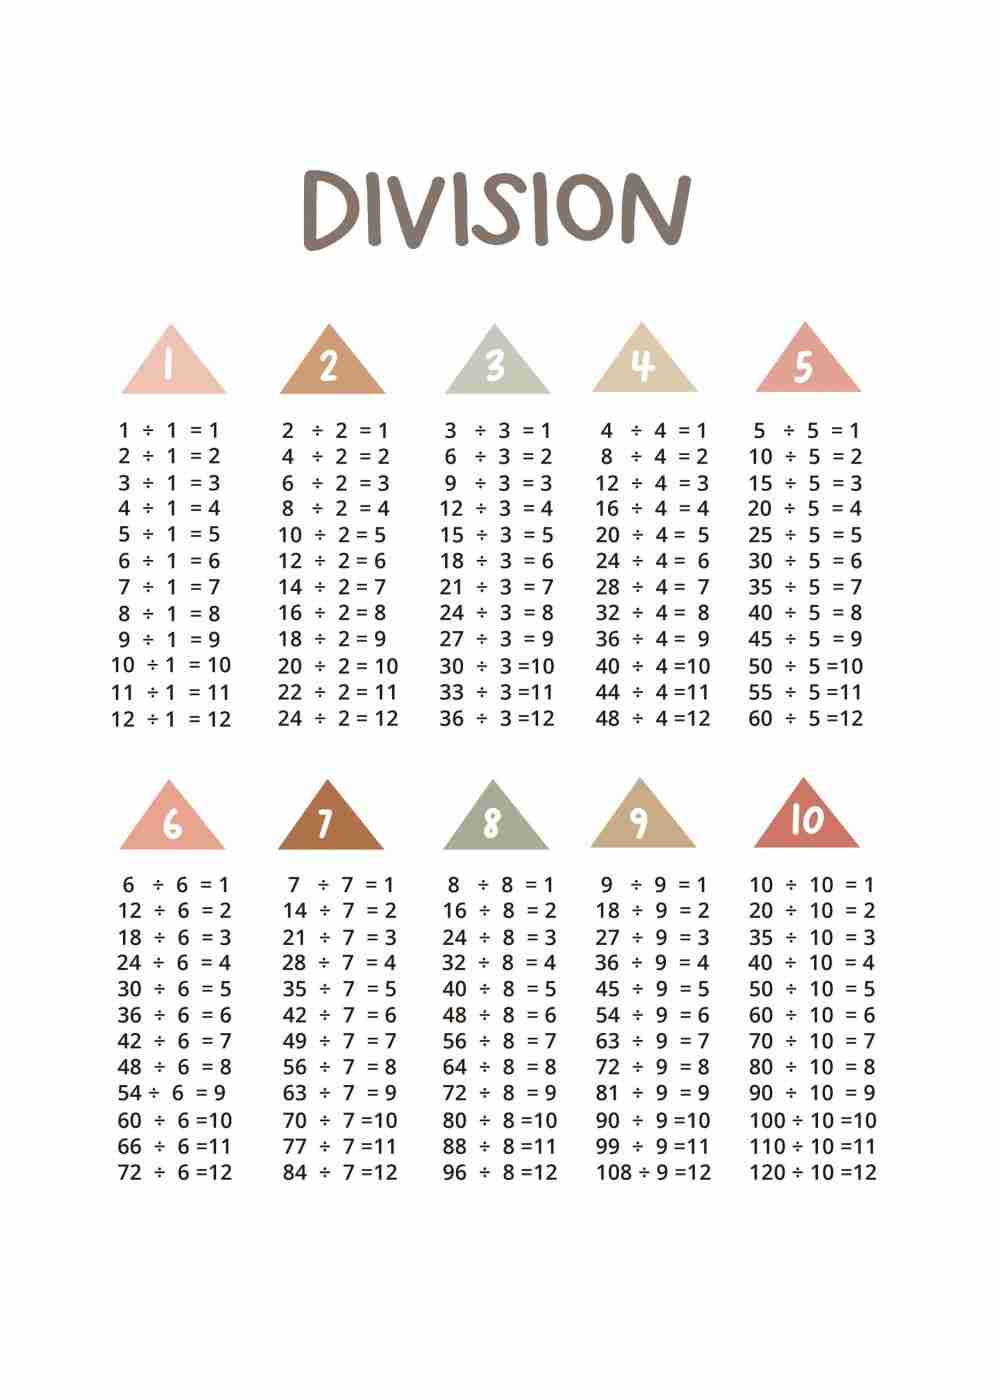 Division Poster